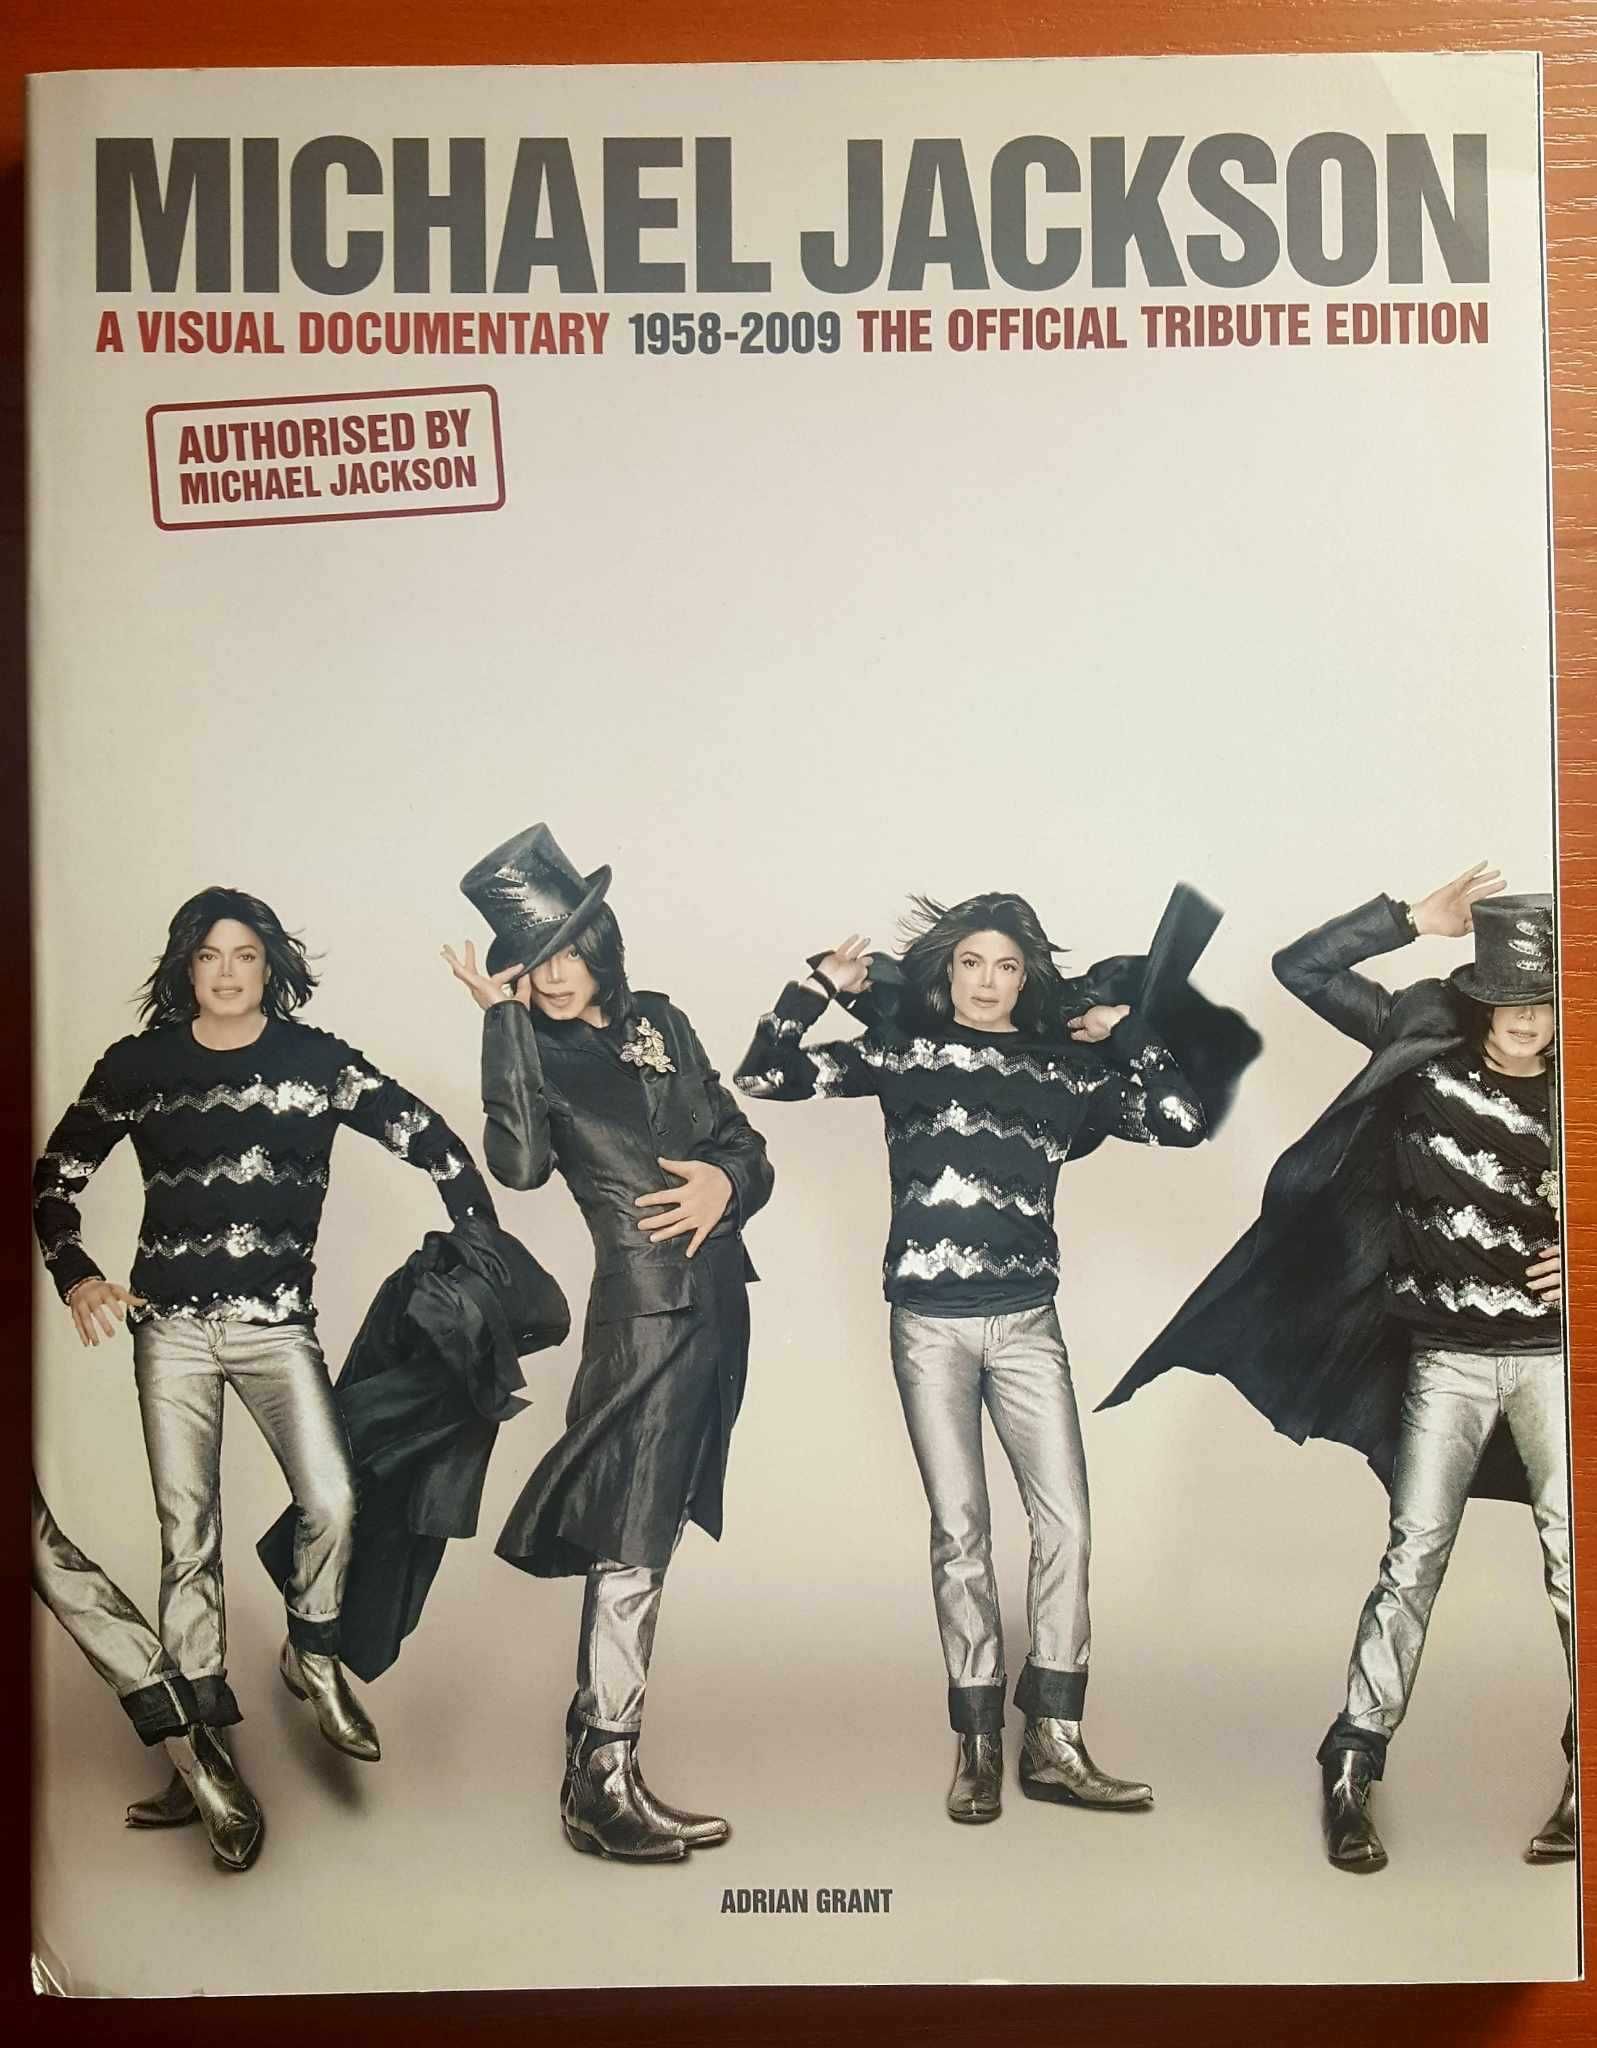 Michael Jackson: A Visual Documentary The Official Tribute Edition